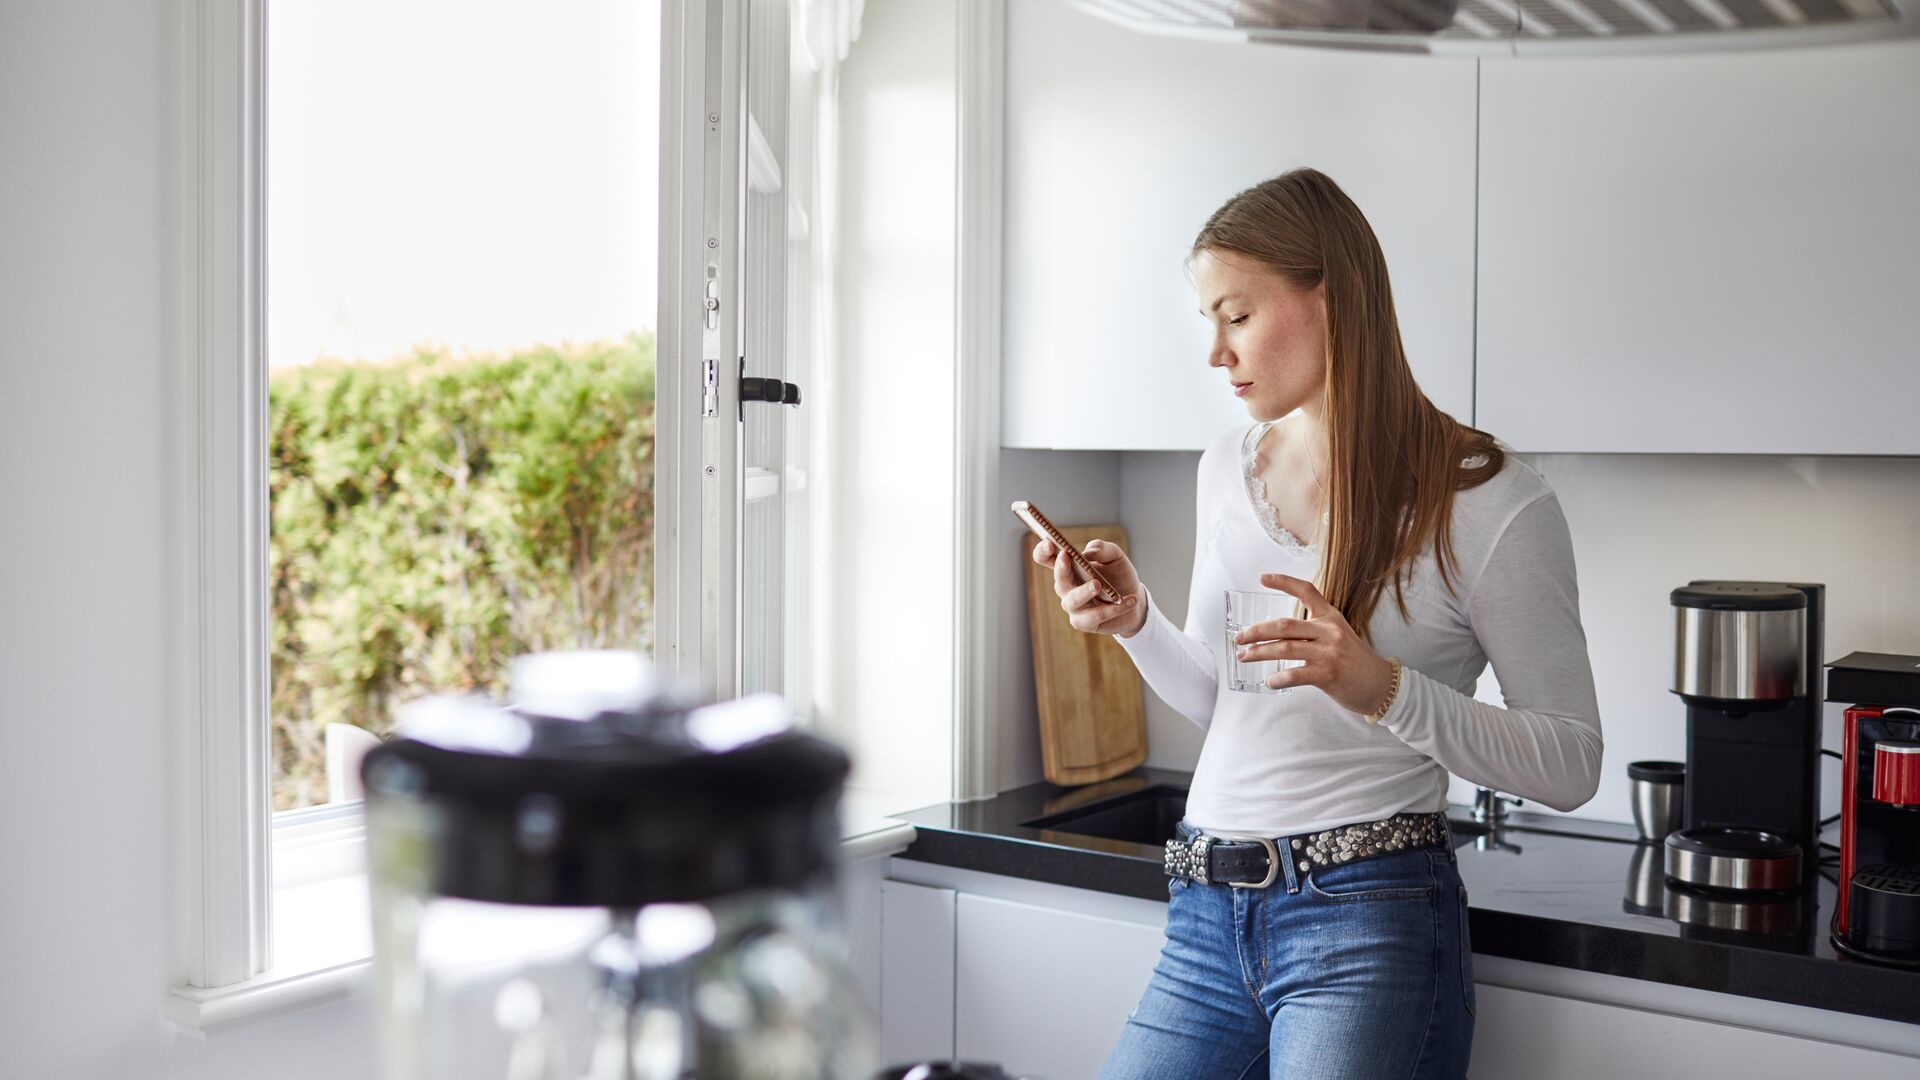 Image of woman using mobile device in her kitchen. Concept for digital health in the treatment of IBS.